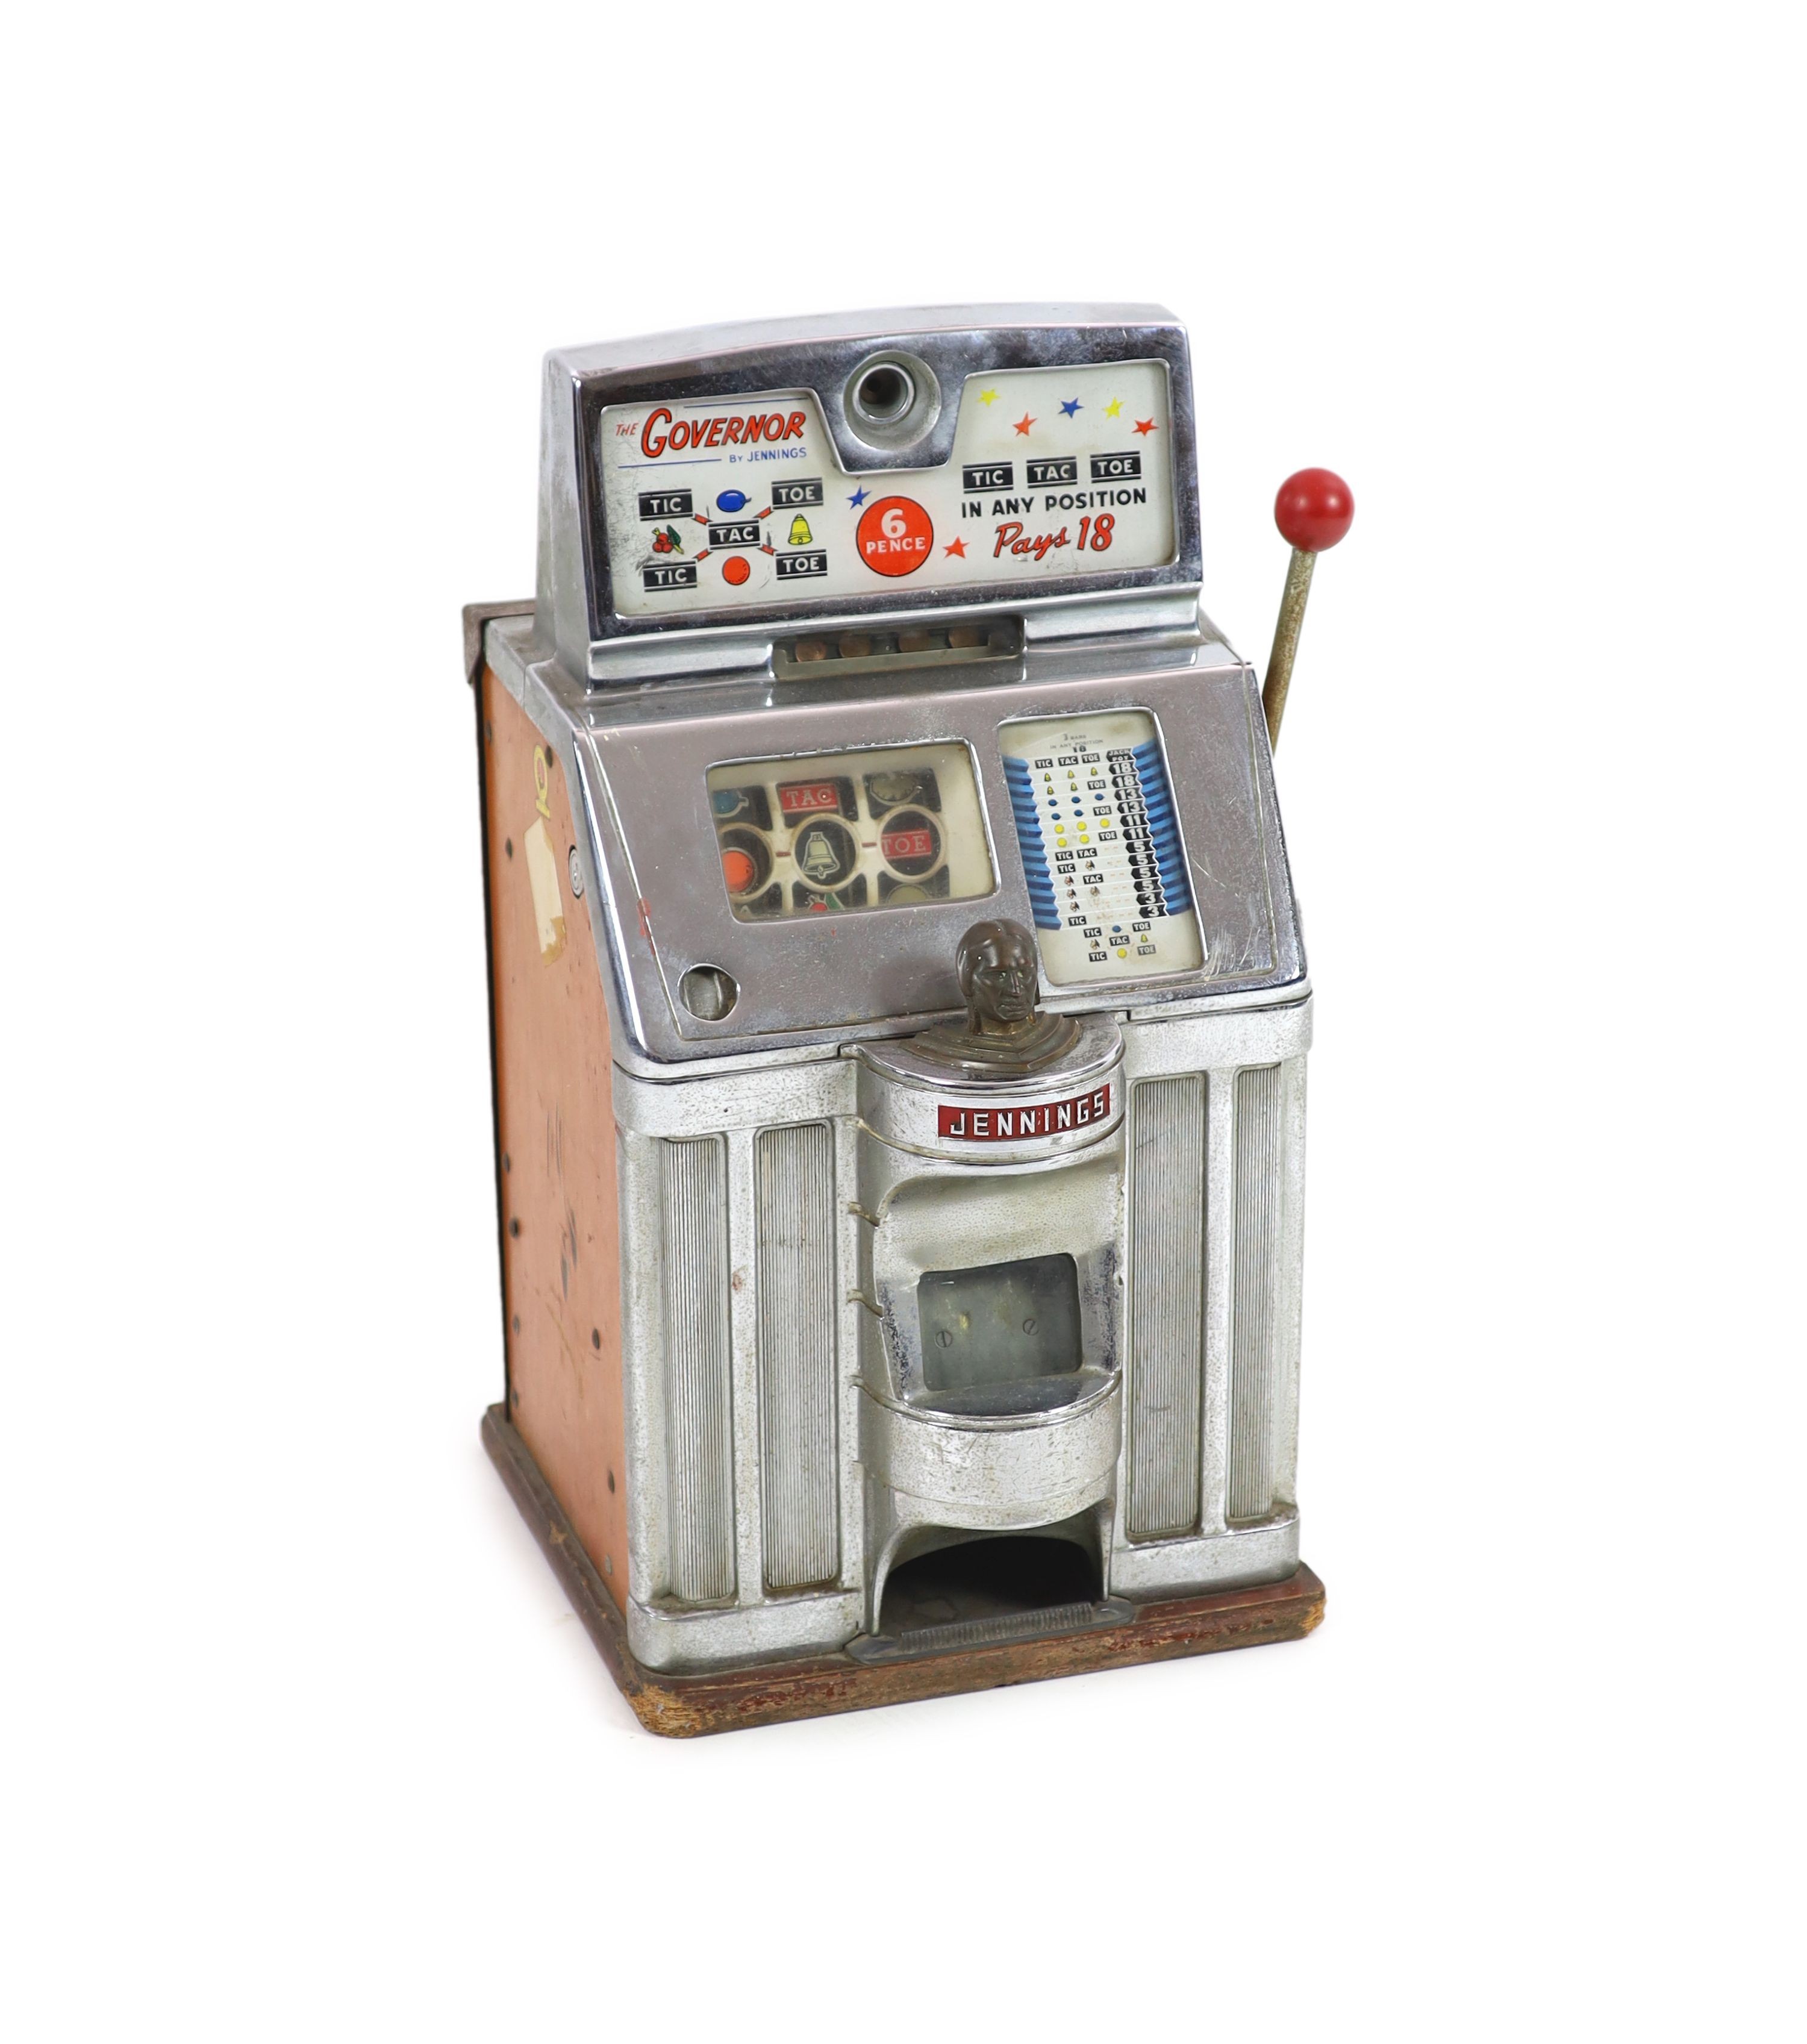 A Jennings 'The Governor' Tic Tac Toe penny slot machine, width 39cm depth 44cm height 69cm